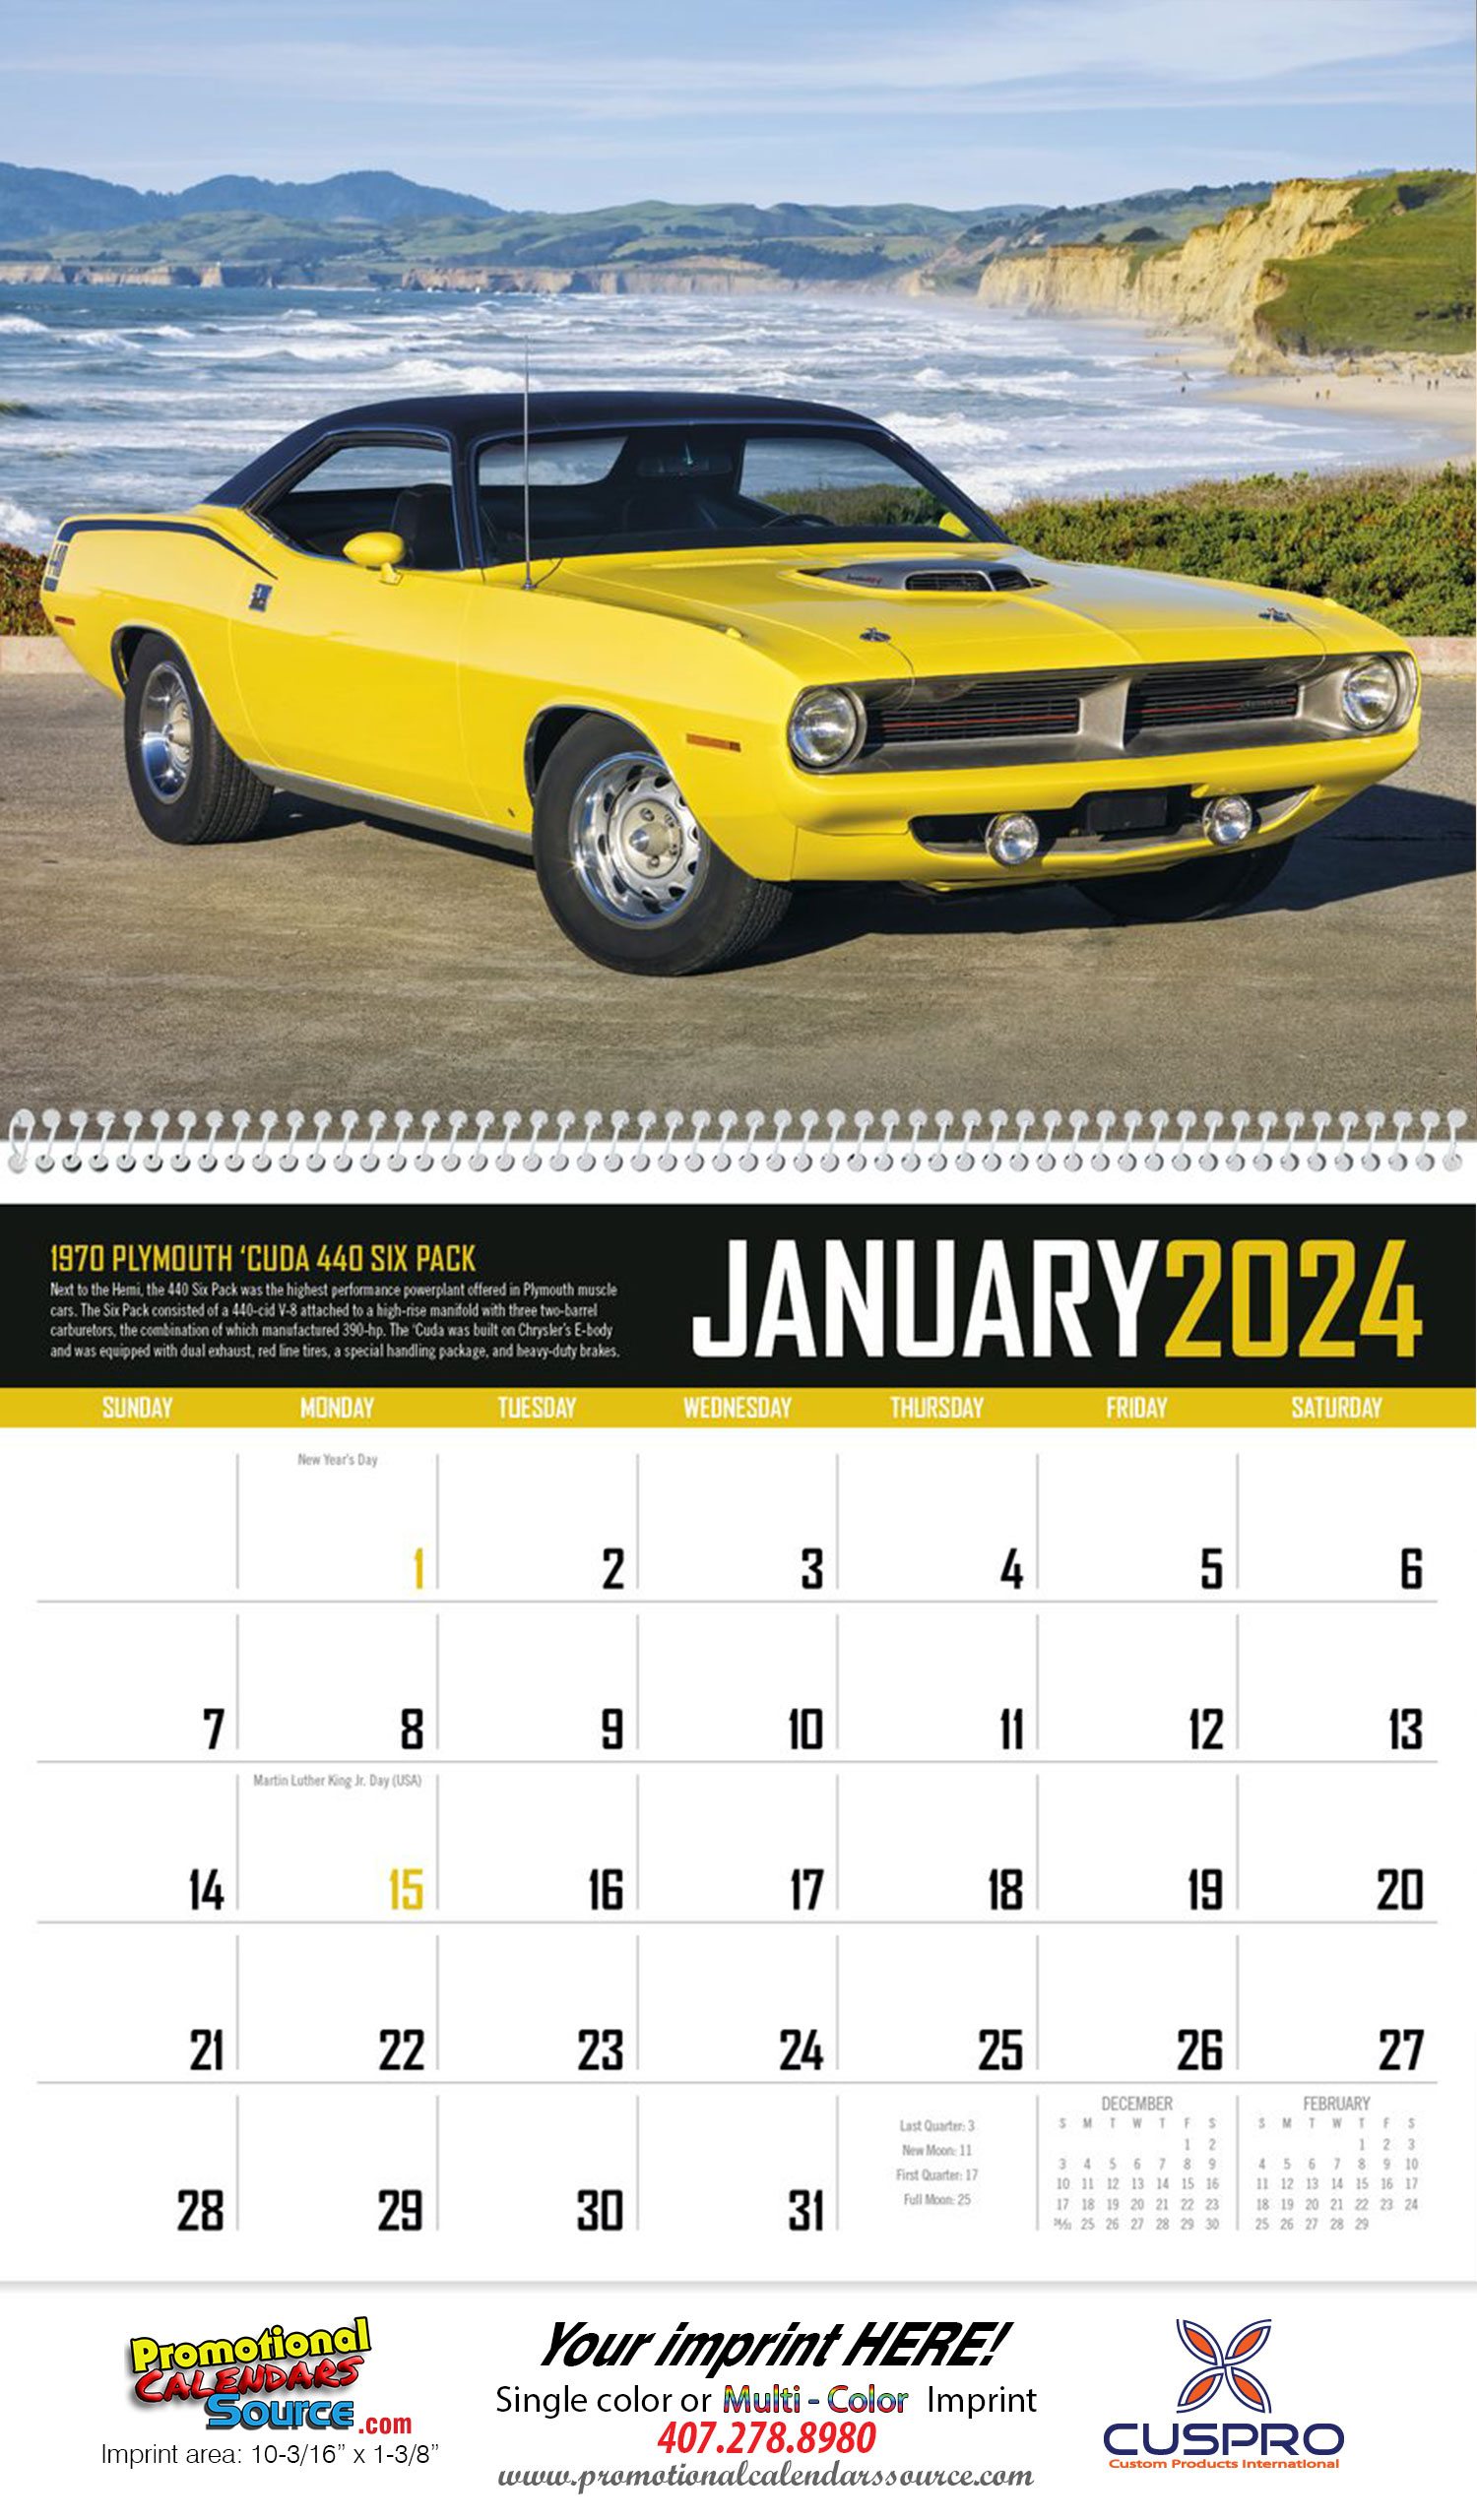 4imprint-muscle-cars-calendar-with-2-month-view-123704